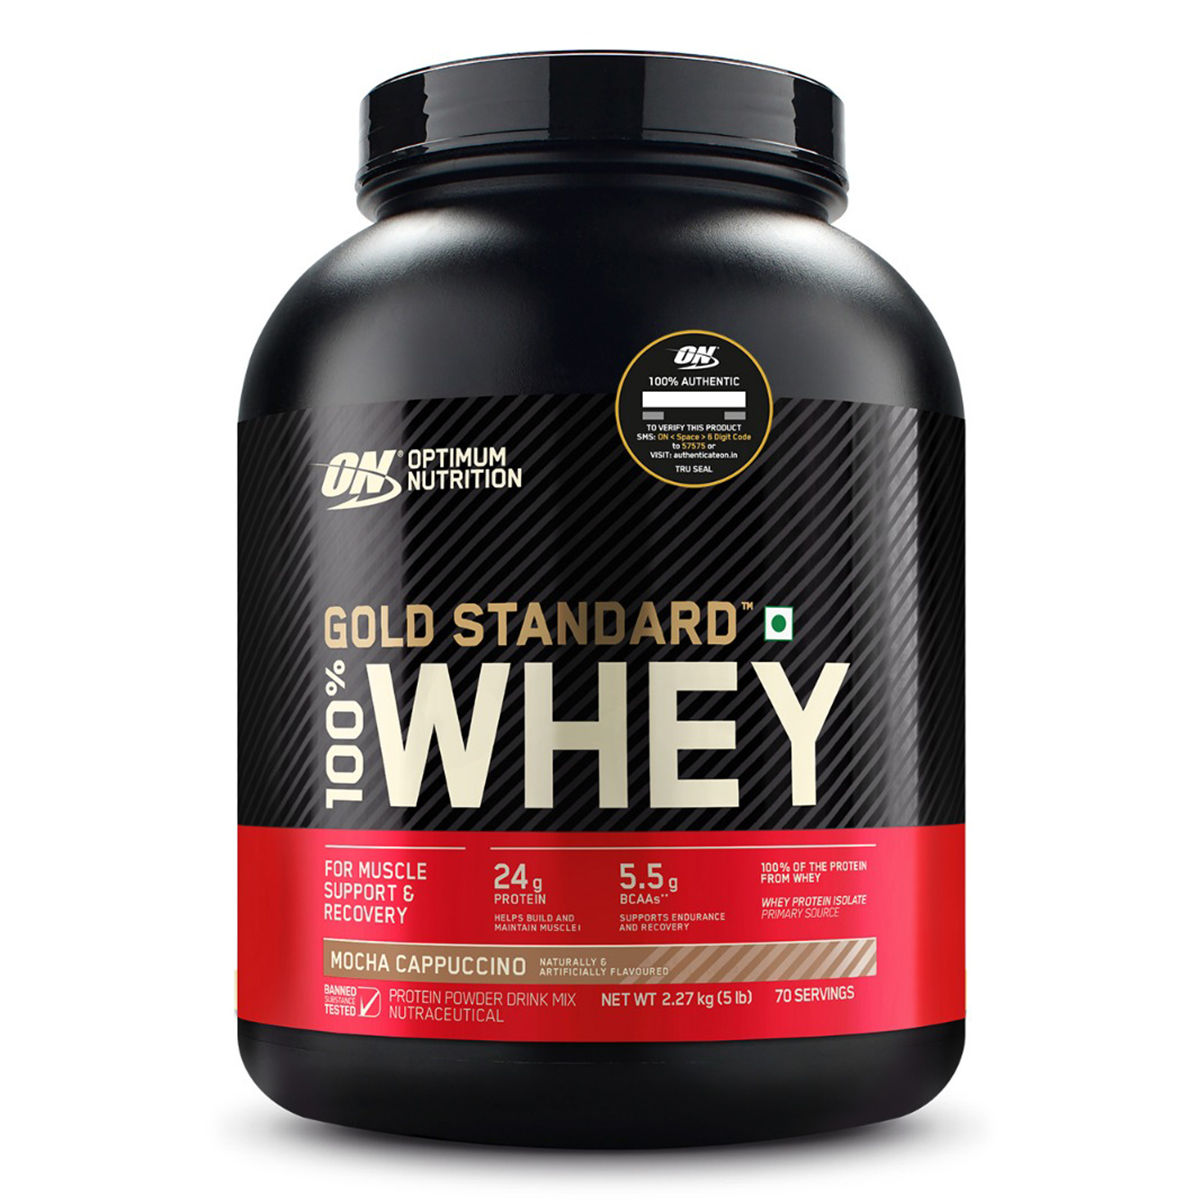 Buy Optimum Nutrition (ON) Gold Standard 100% Whey Protein Mocha Cappuccino Flavour Powder, 5 lb Online